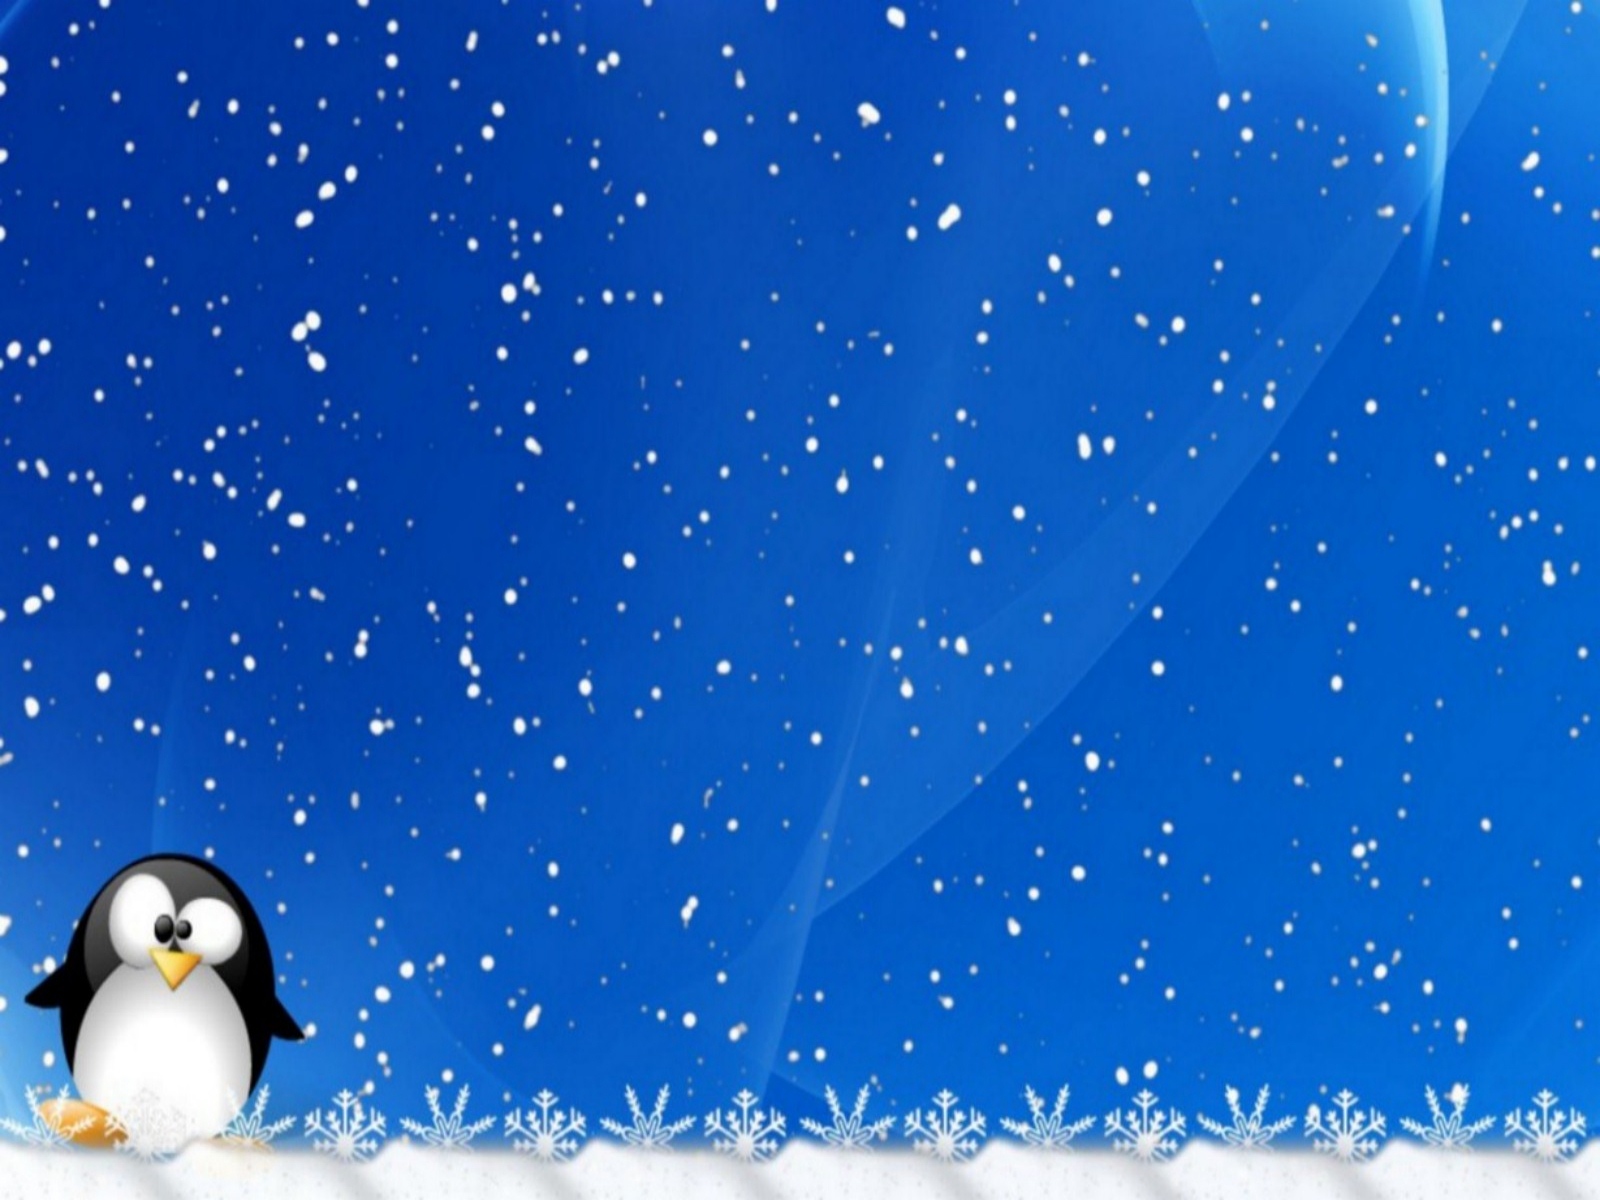 Back Gallery For Winter Holiday Wallpaper